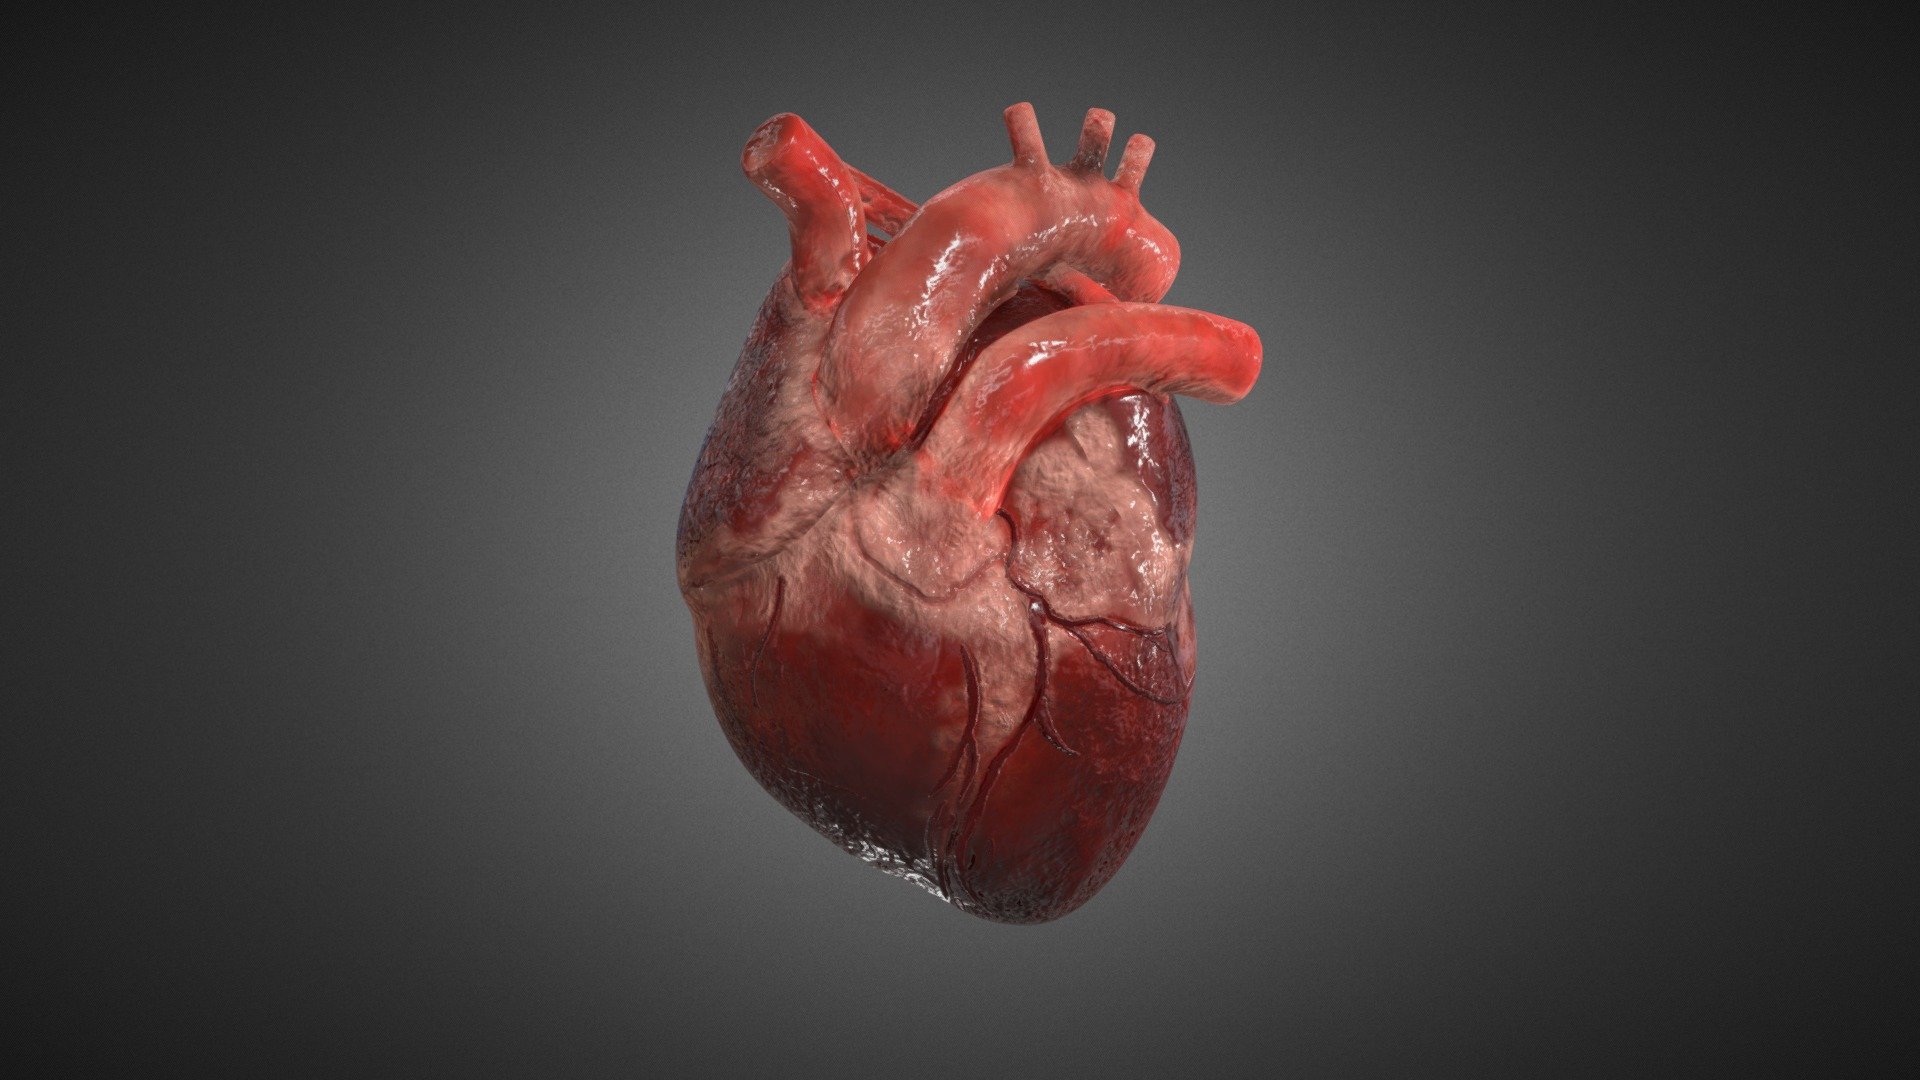 Real Human Heart Images